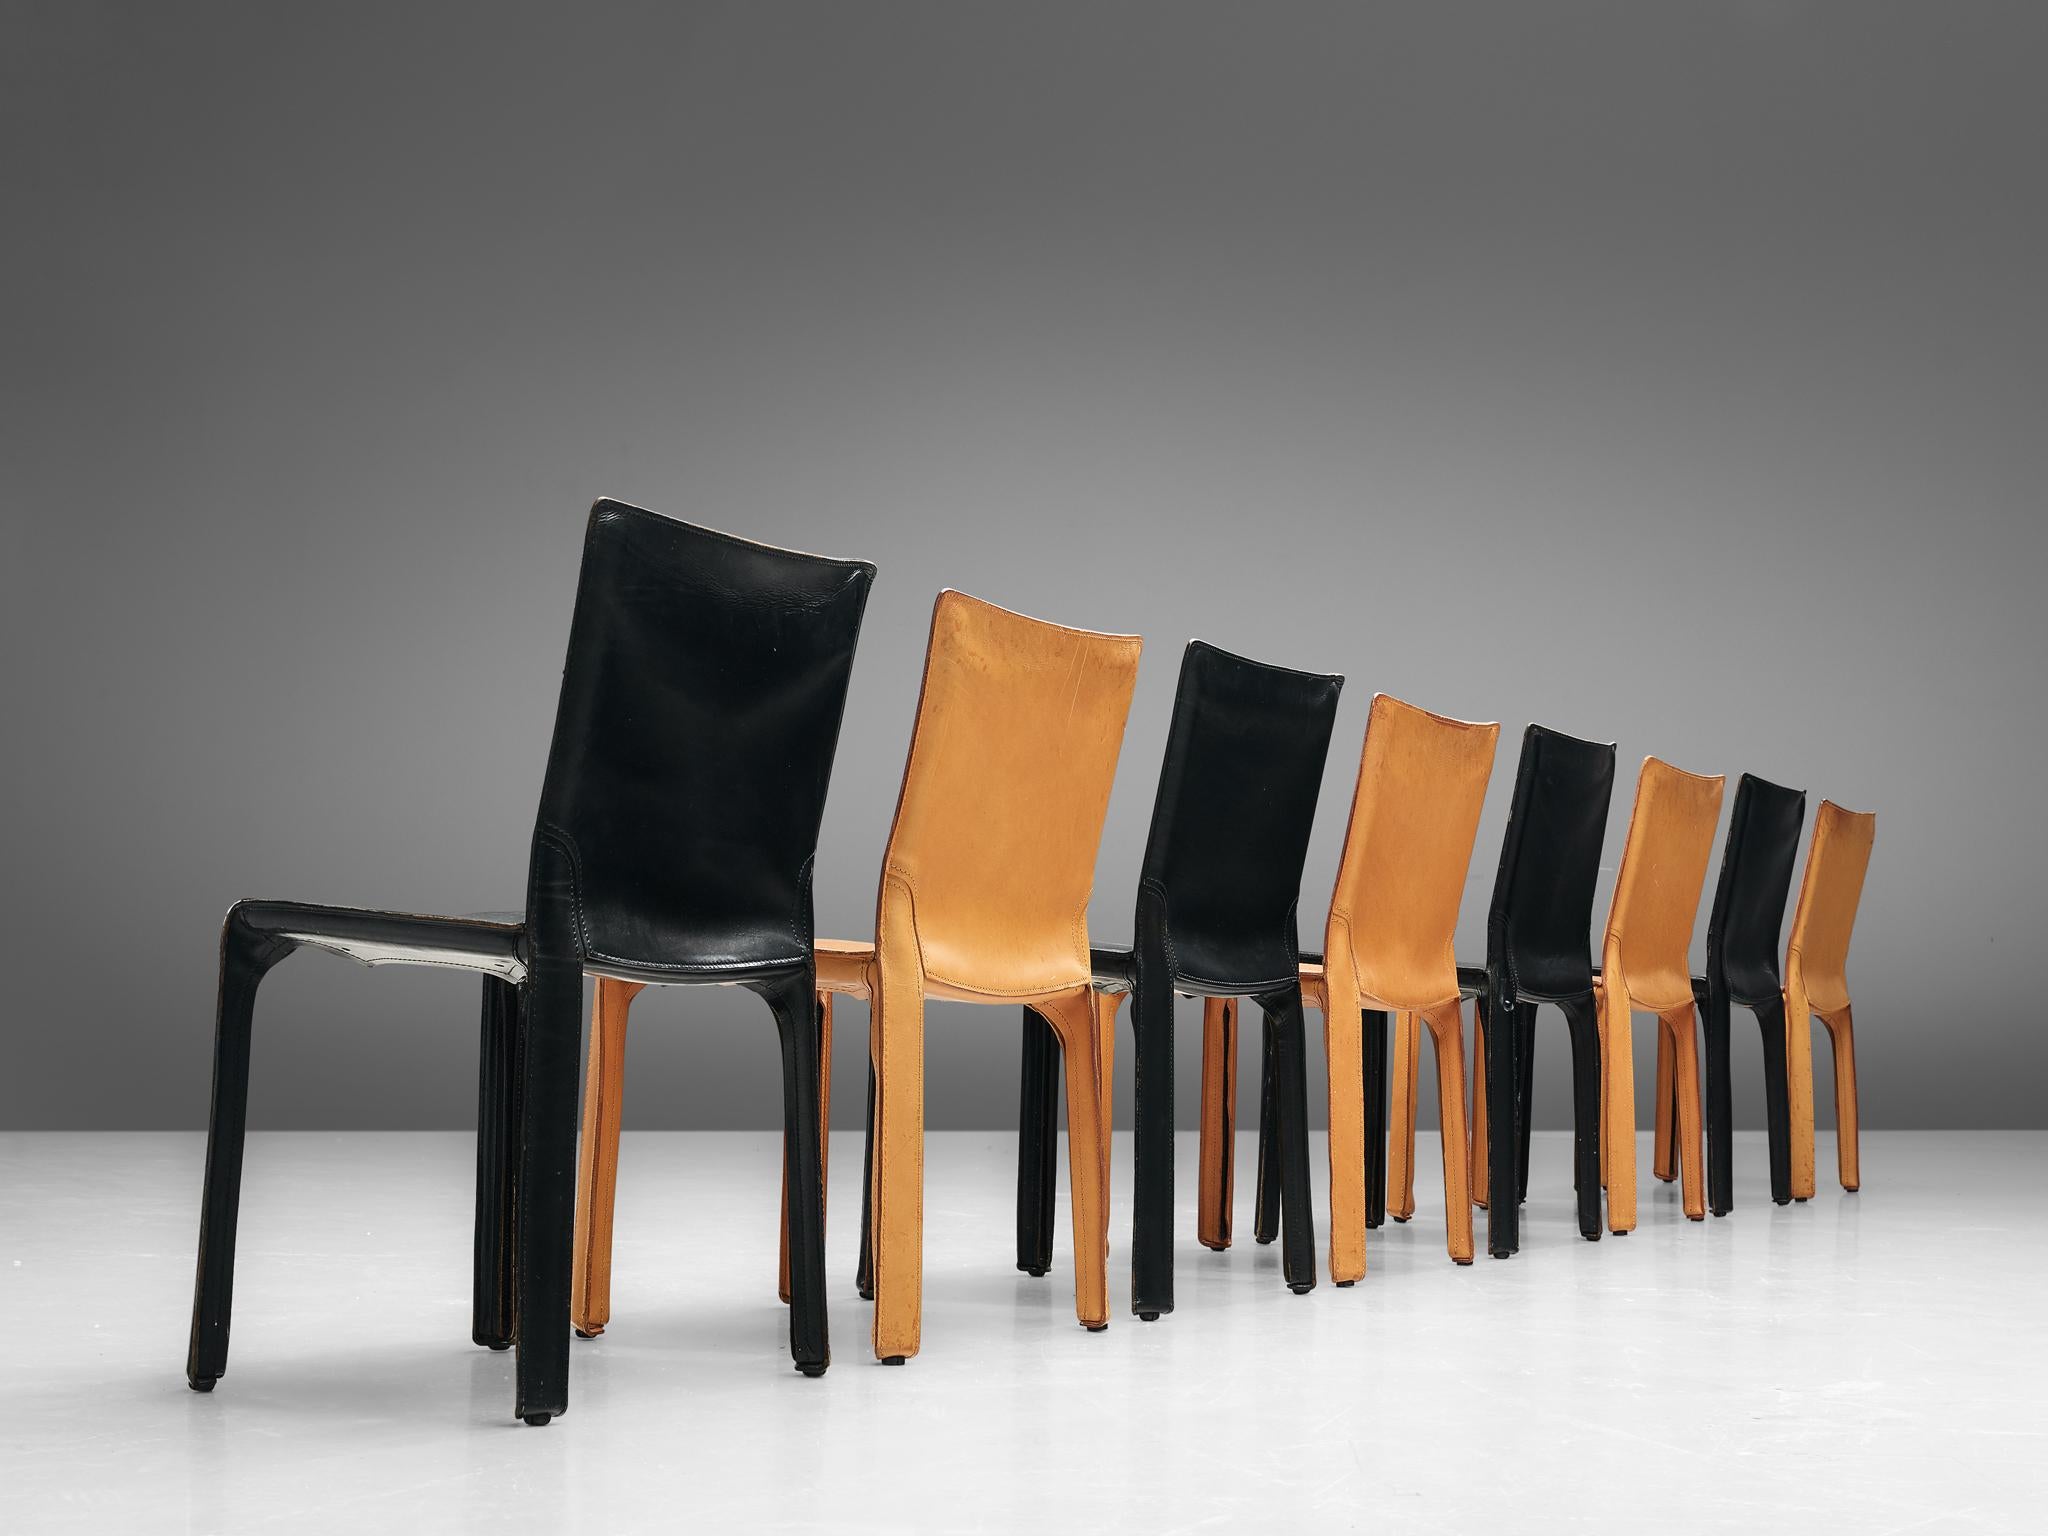 Mario Bellini for Cassina, set of 8 'cab' dining chairs, black and cognac leather, Italy, 1970s.

Conceptually, the chair was designed to become marked and shaped over time by its user. The leather skin fits like a glove over the steel skeleton and